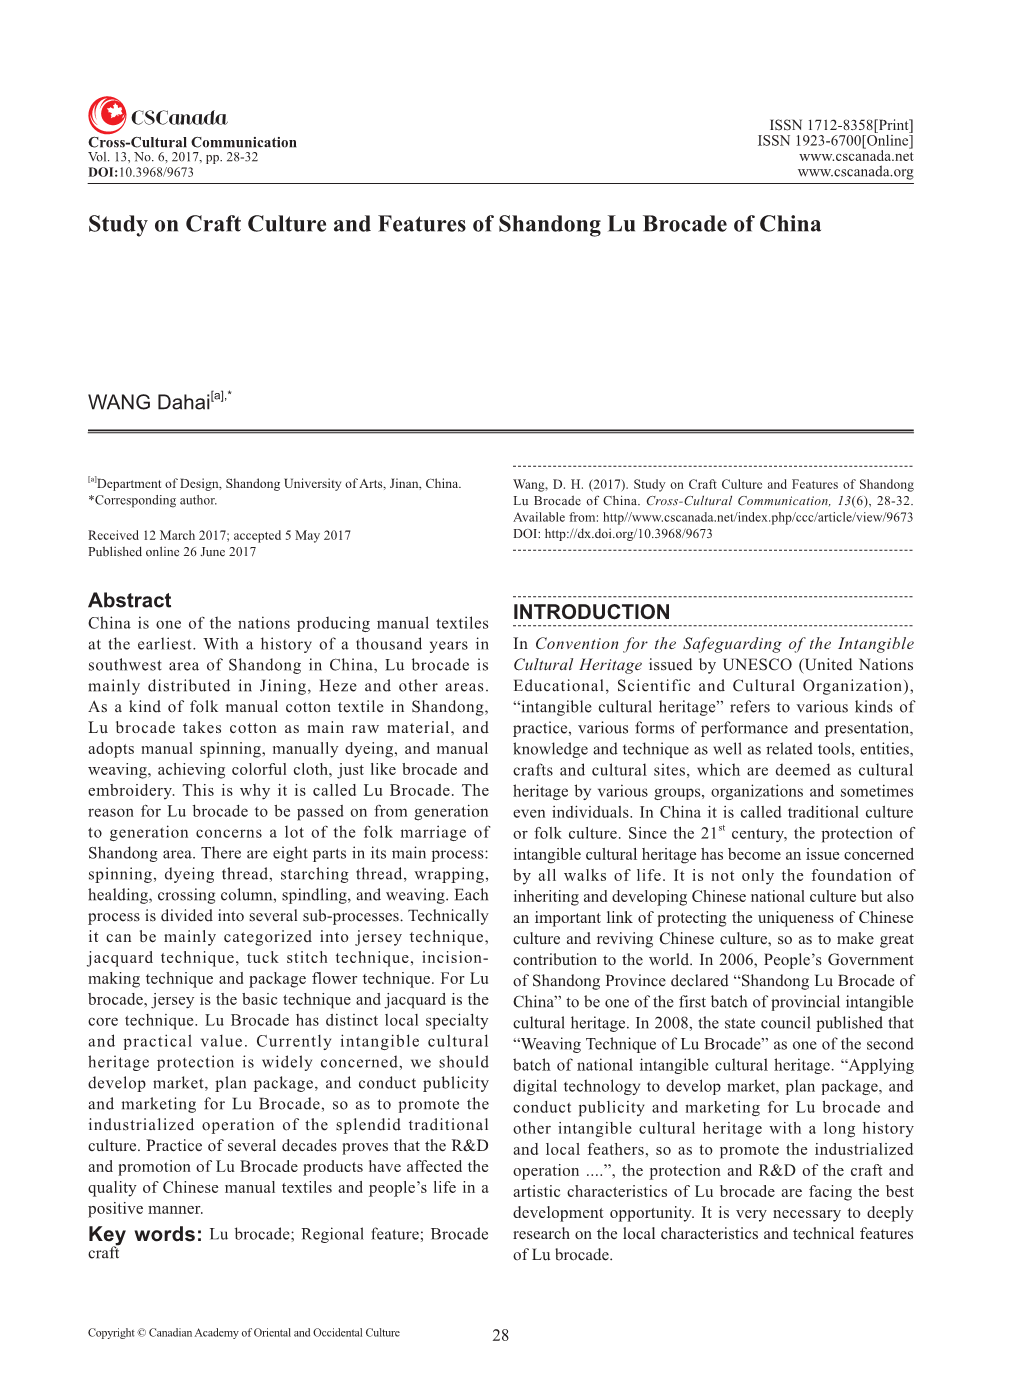 Study on Craft Culture and Features of Shandong Lu Brocade of China